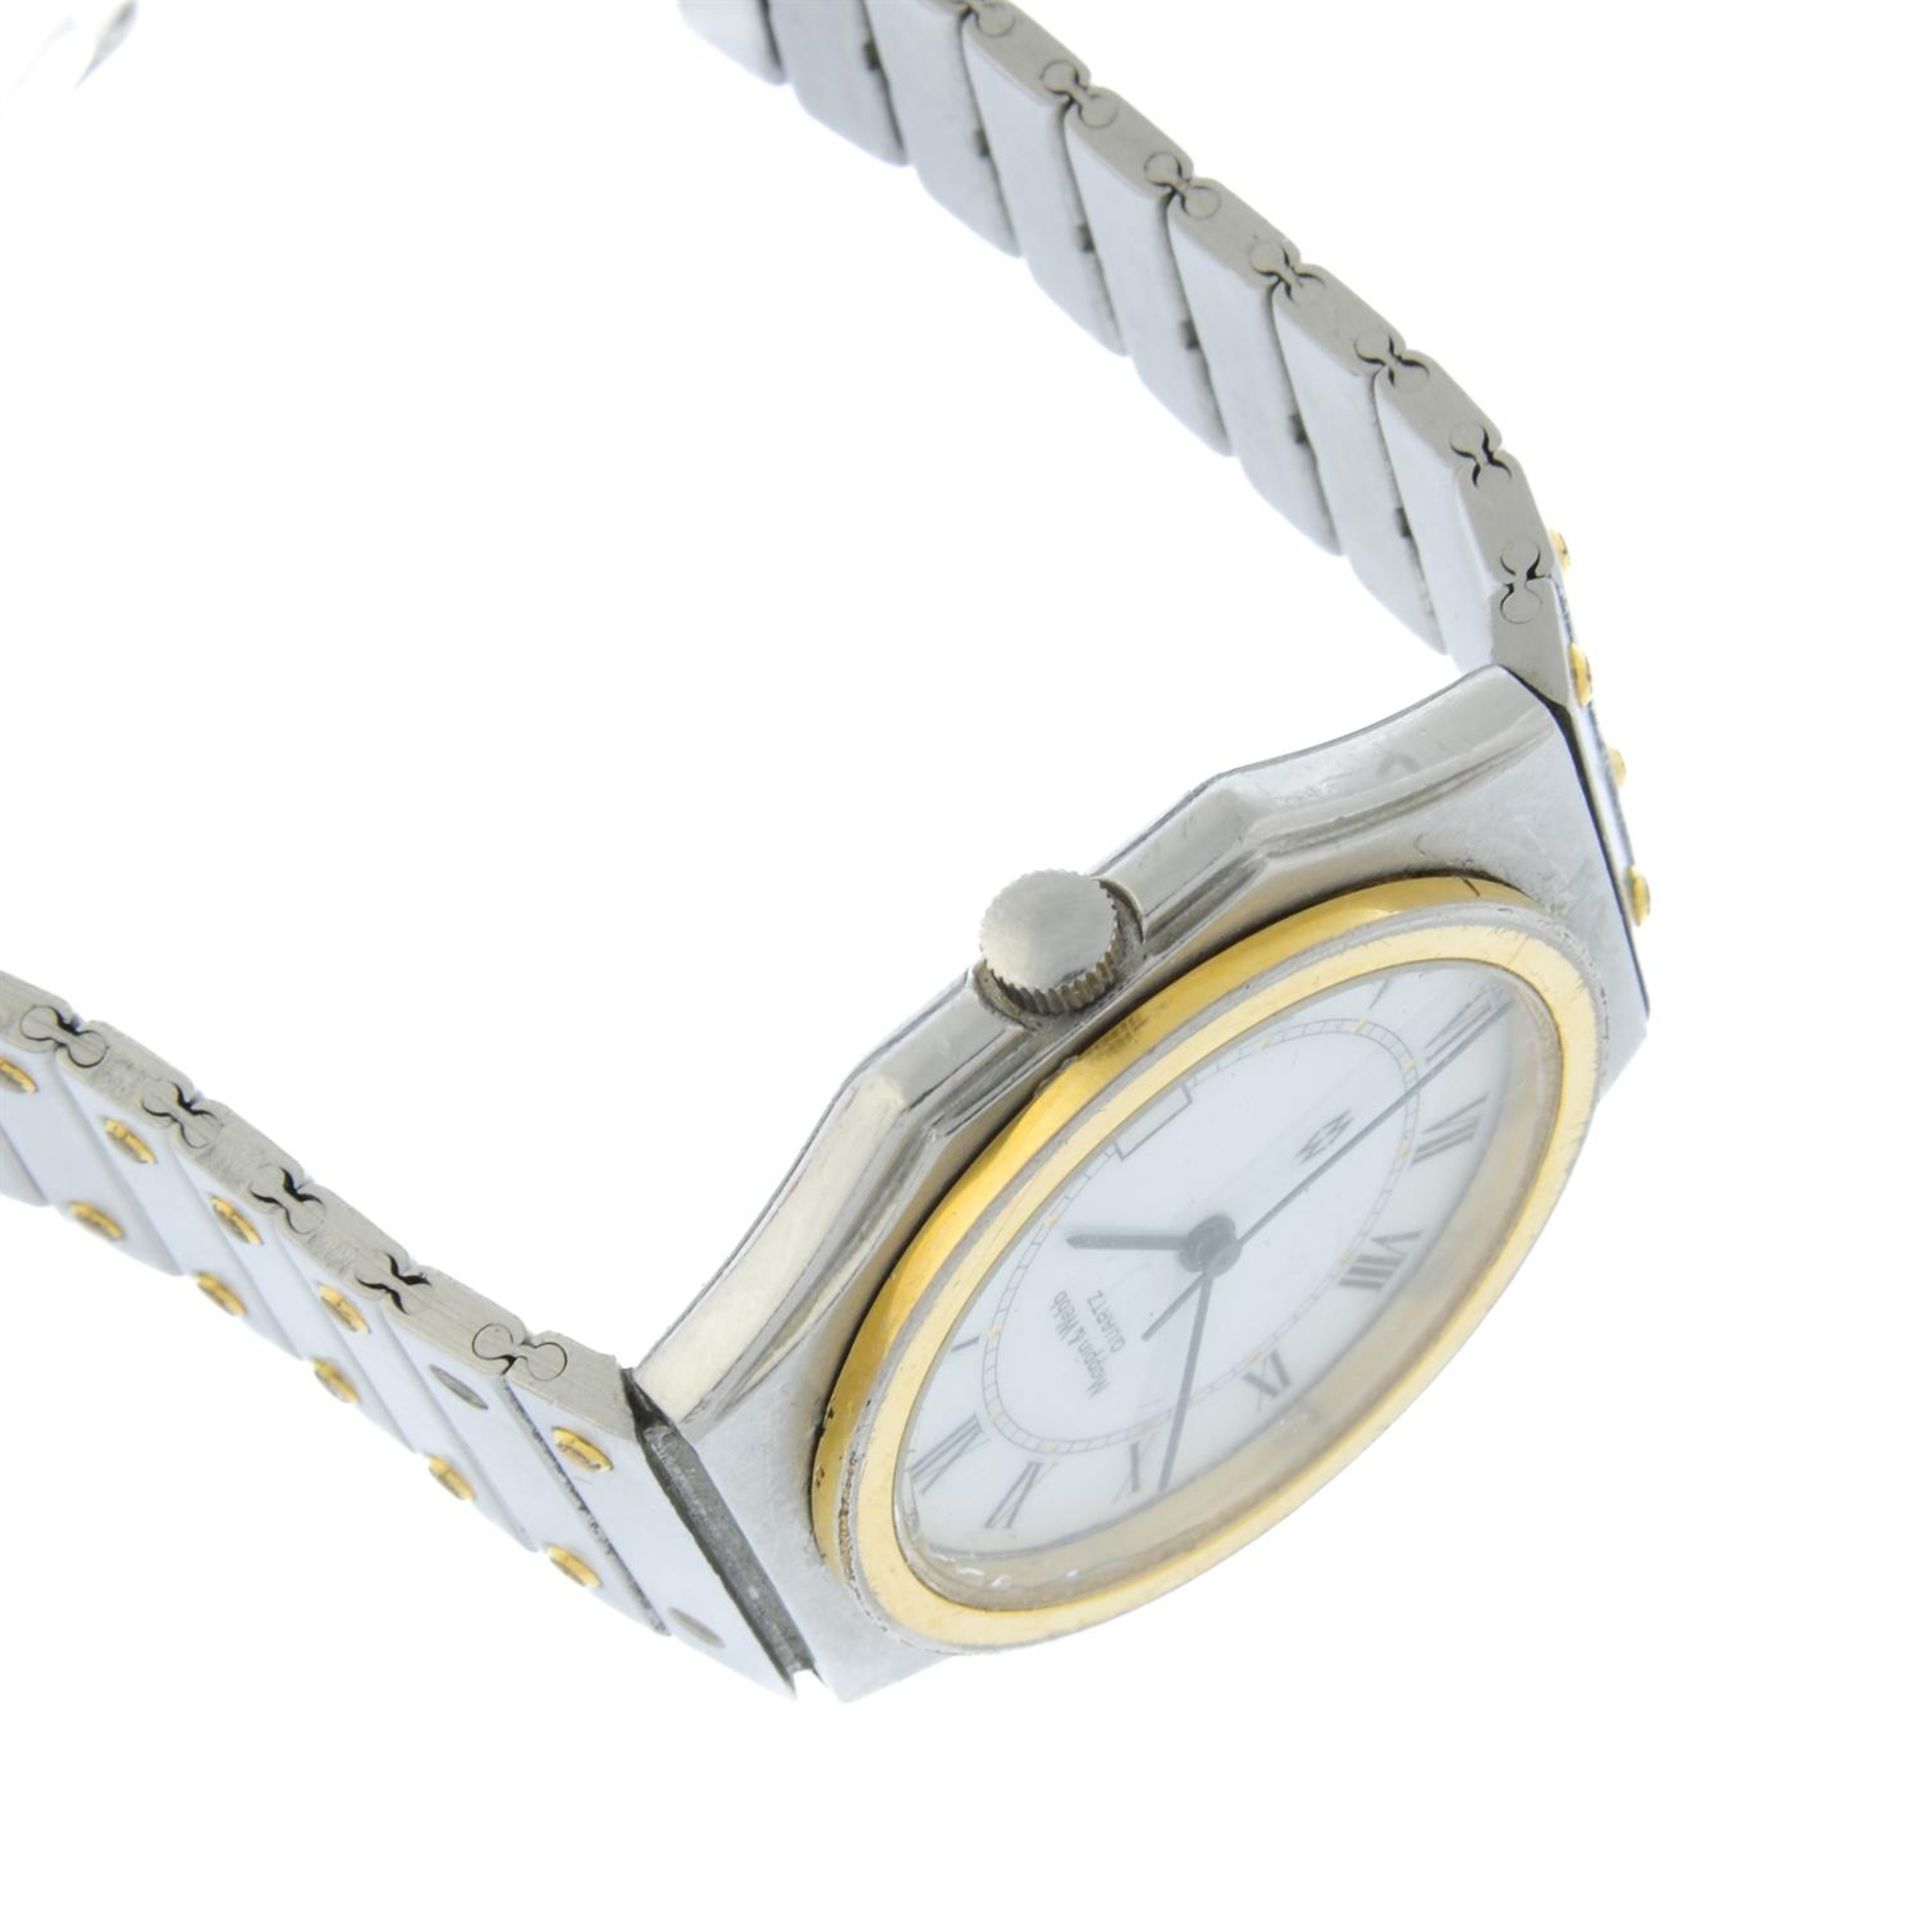 Mappin & Webb - a watch, 33mm. - Image 3 of 4